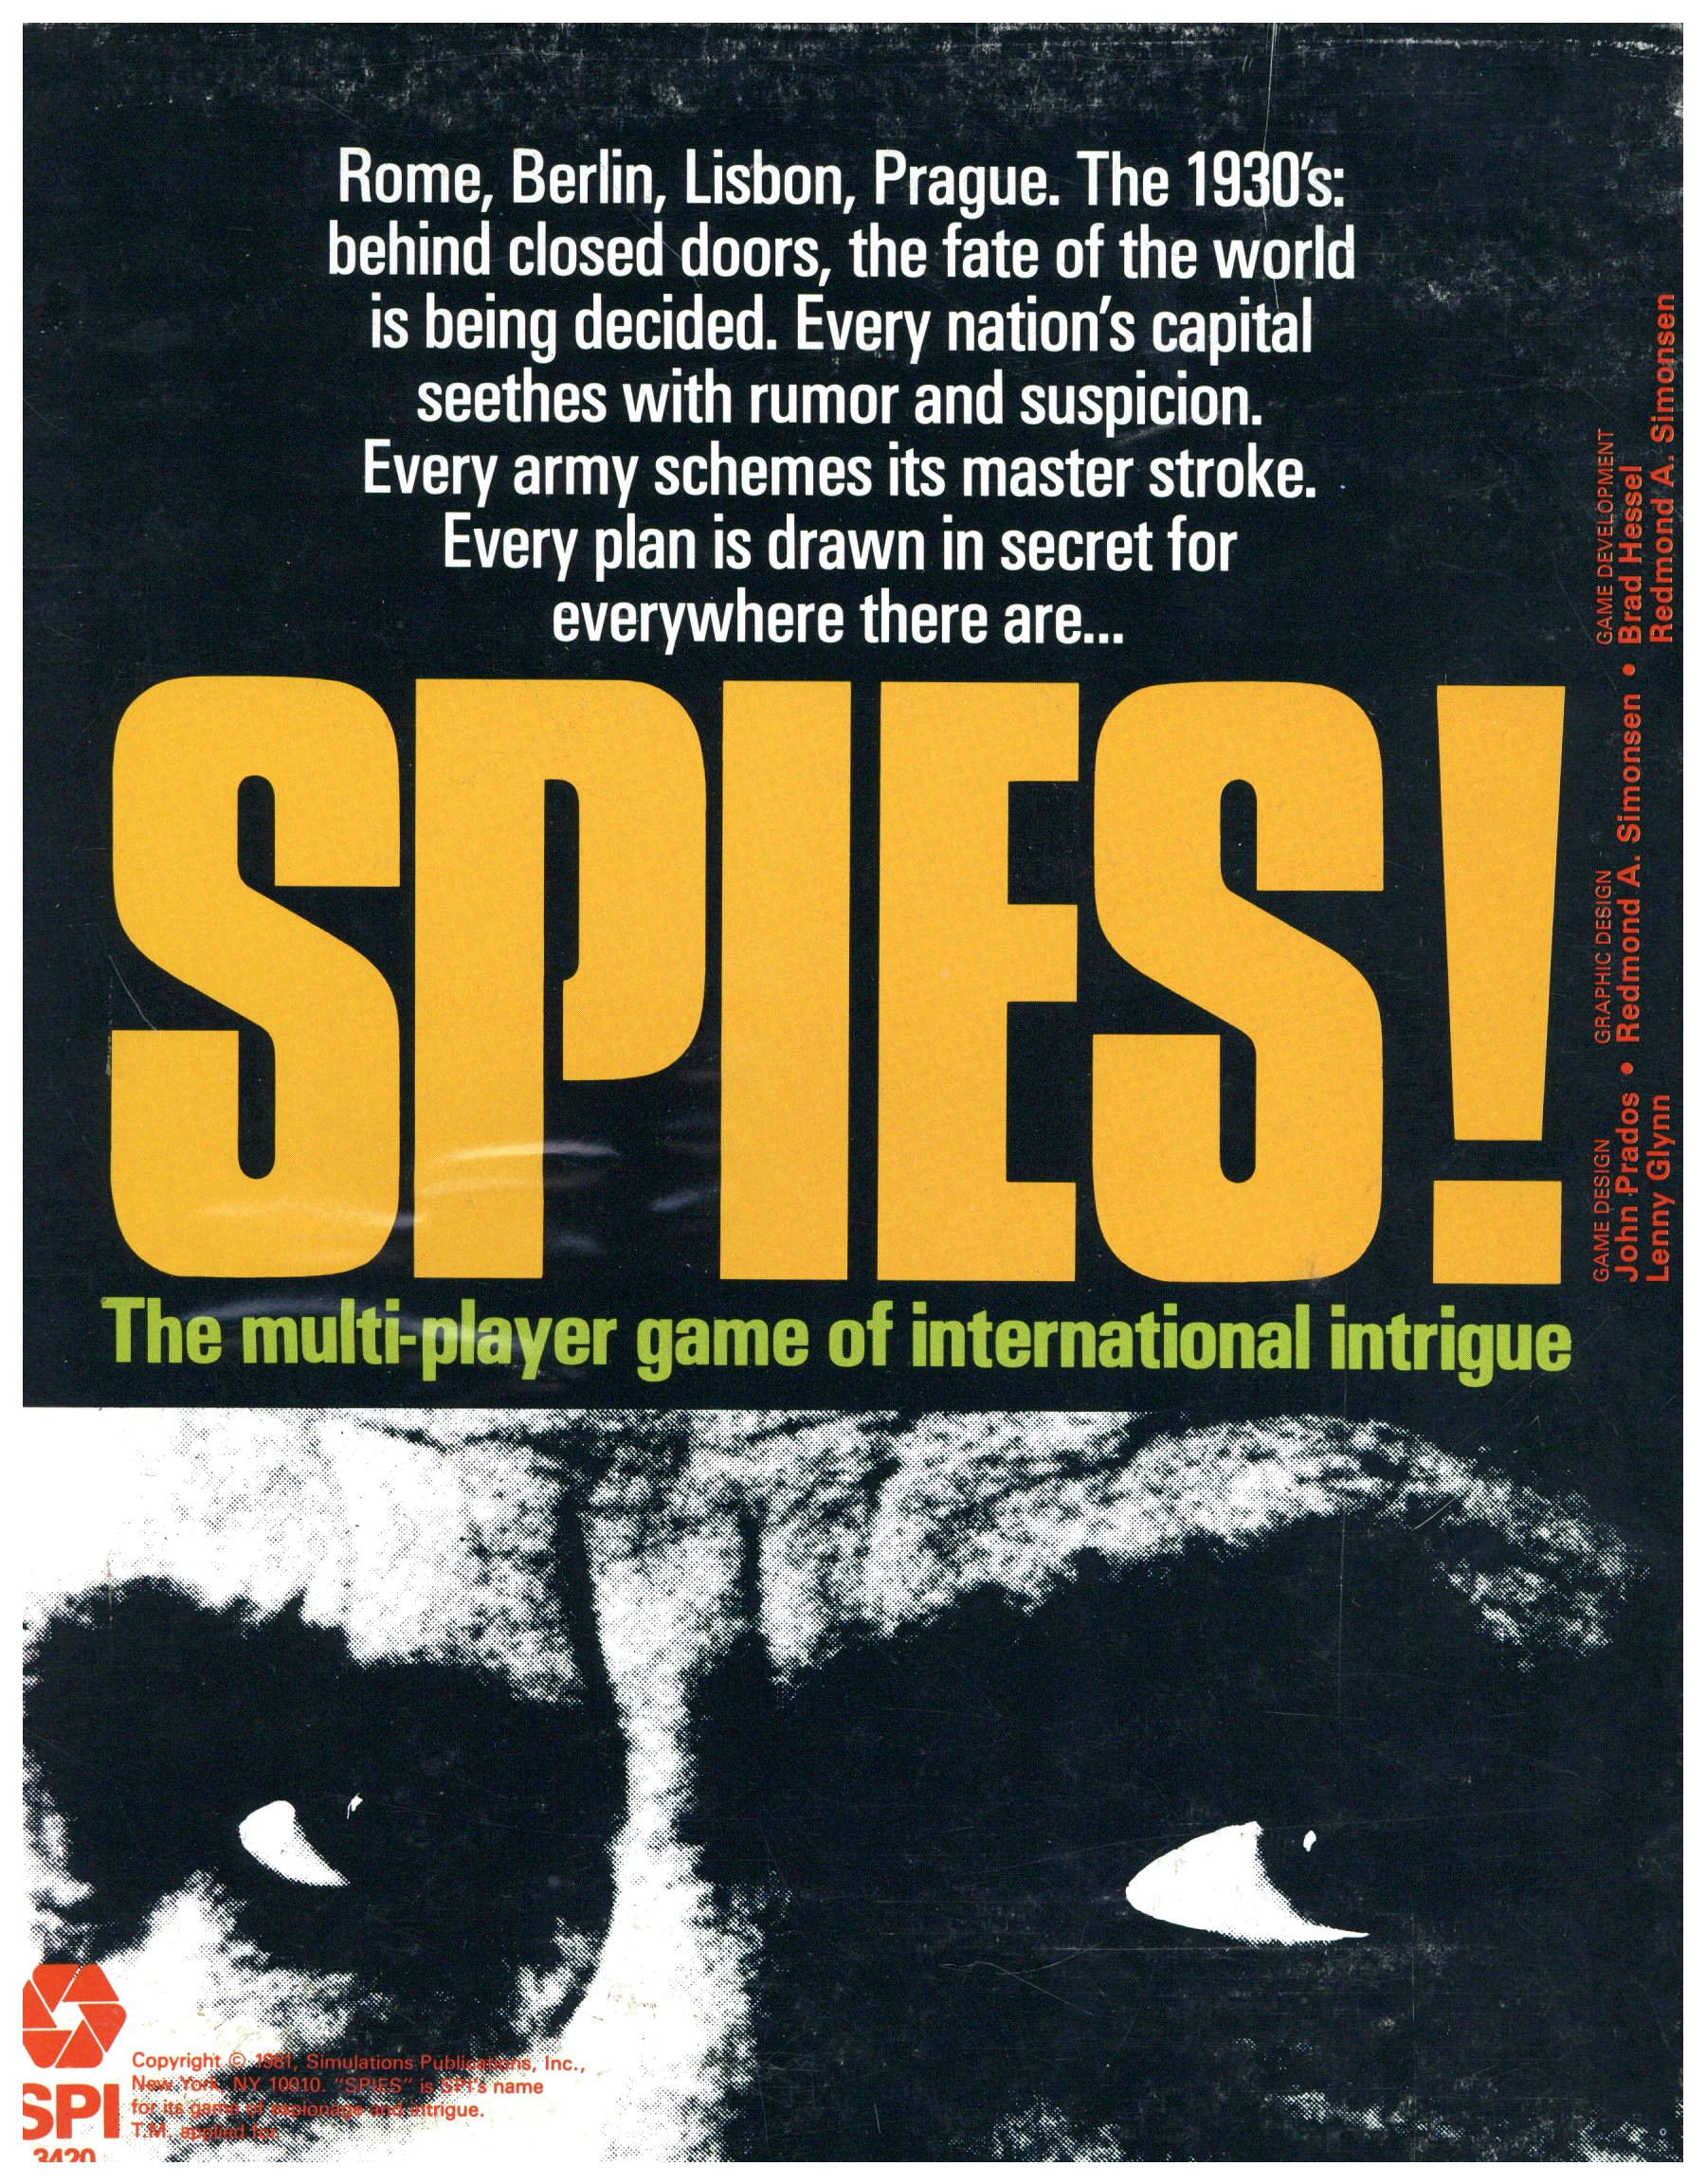 SpiesThe multiplayer game of international intrigue